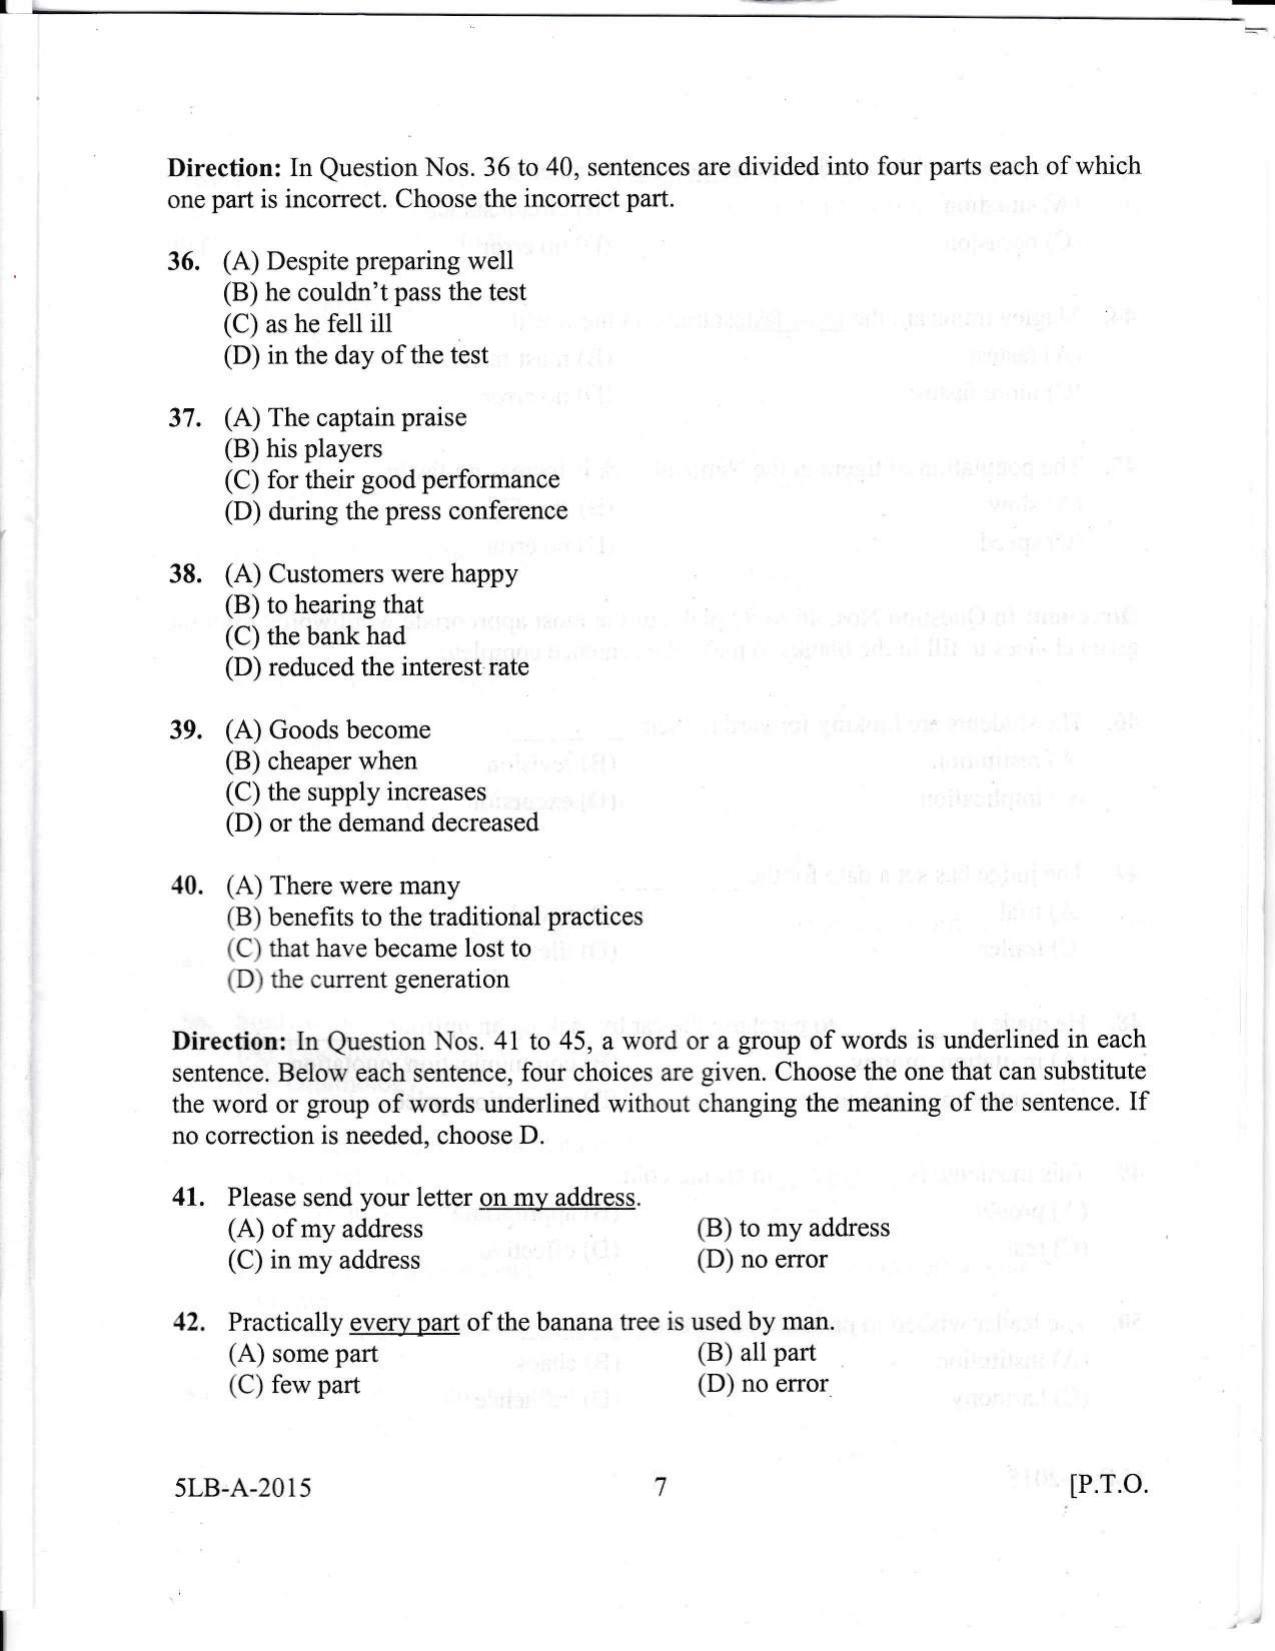 KLEE 5 Year LLB Exam 2015 Question Paper - Page 7